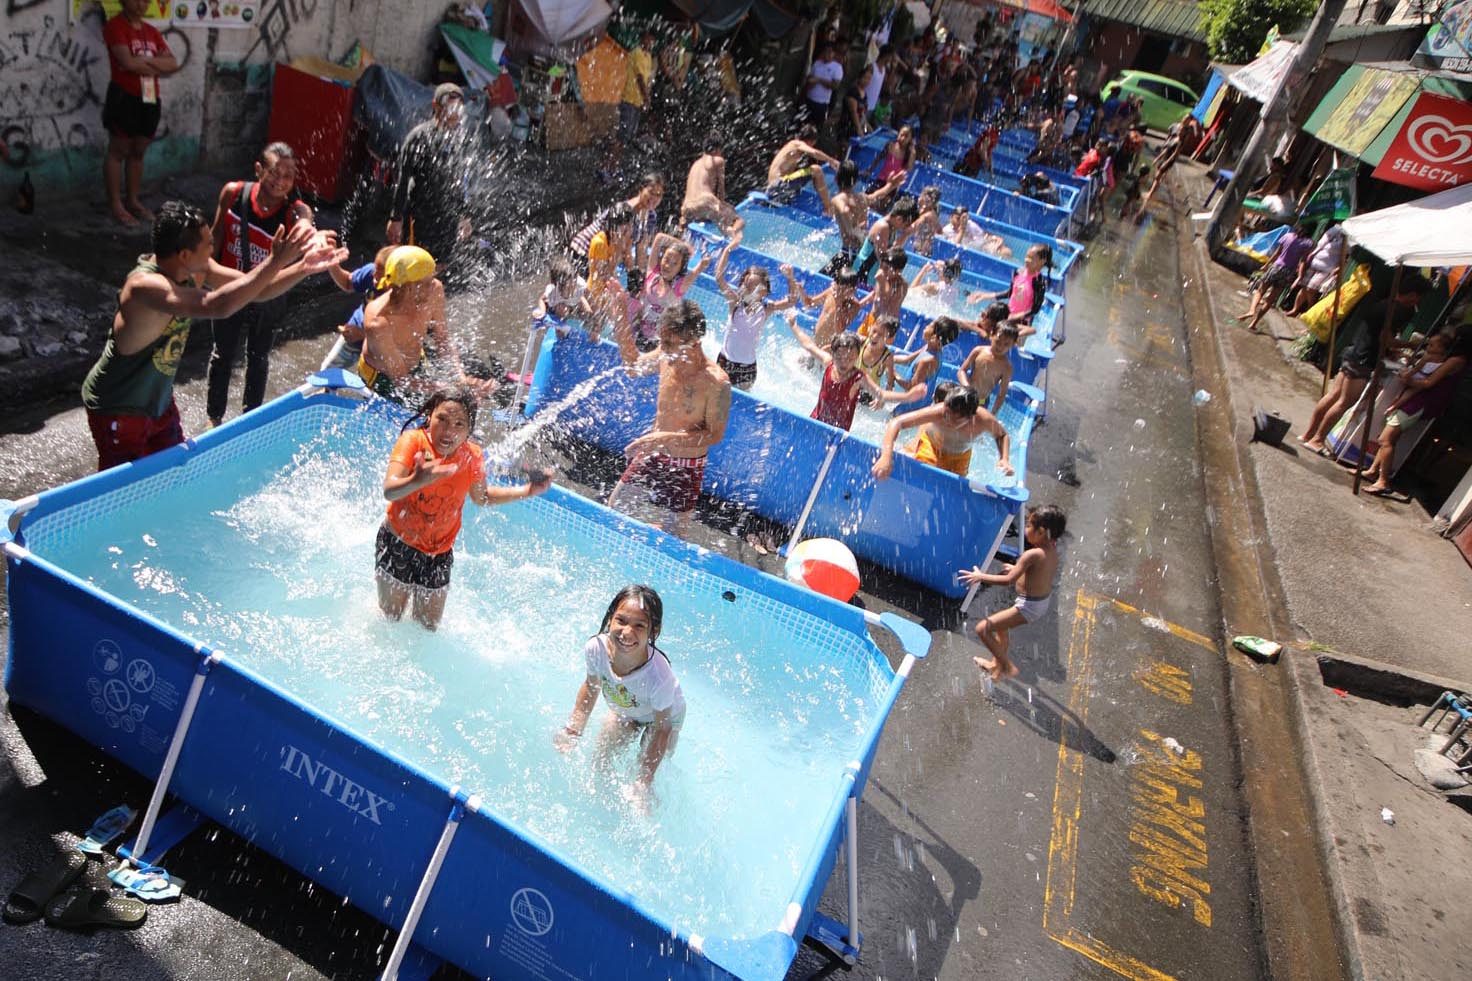 BEATING THE HEAT. Children enjoy the water on inflatable pools installed along the street of Barangay Batis in San Juan City on April 12, 2018. Photo by Darren Langit/Rappler  